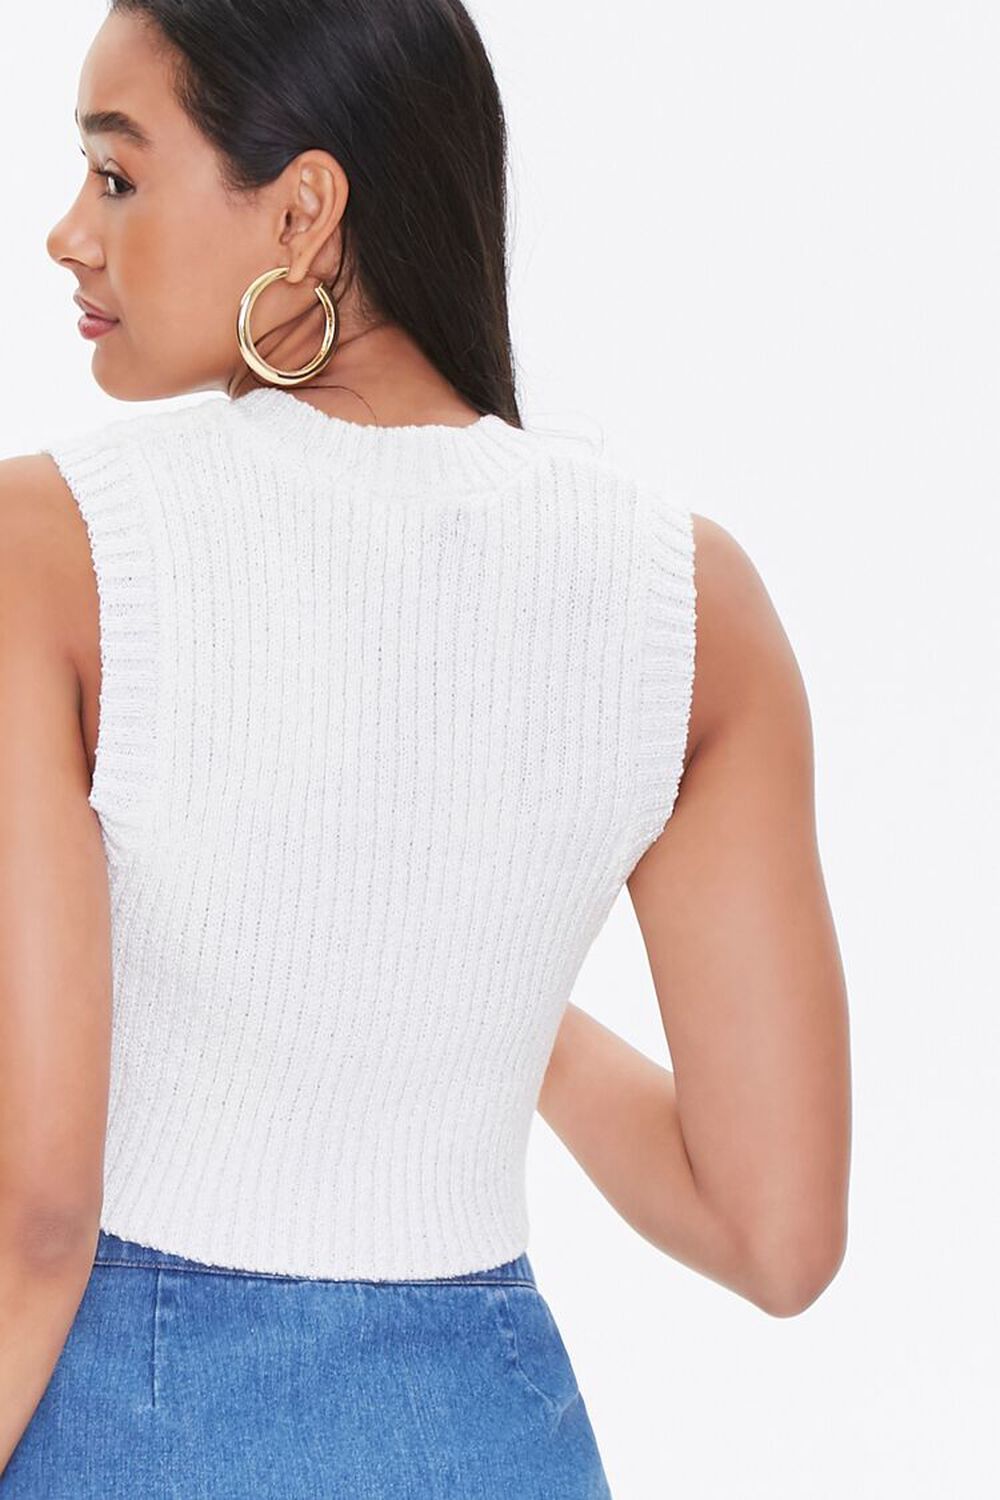 CREAM Cropped Sweater-Knit Vest, image 3